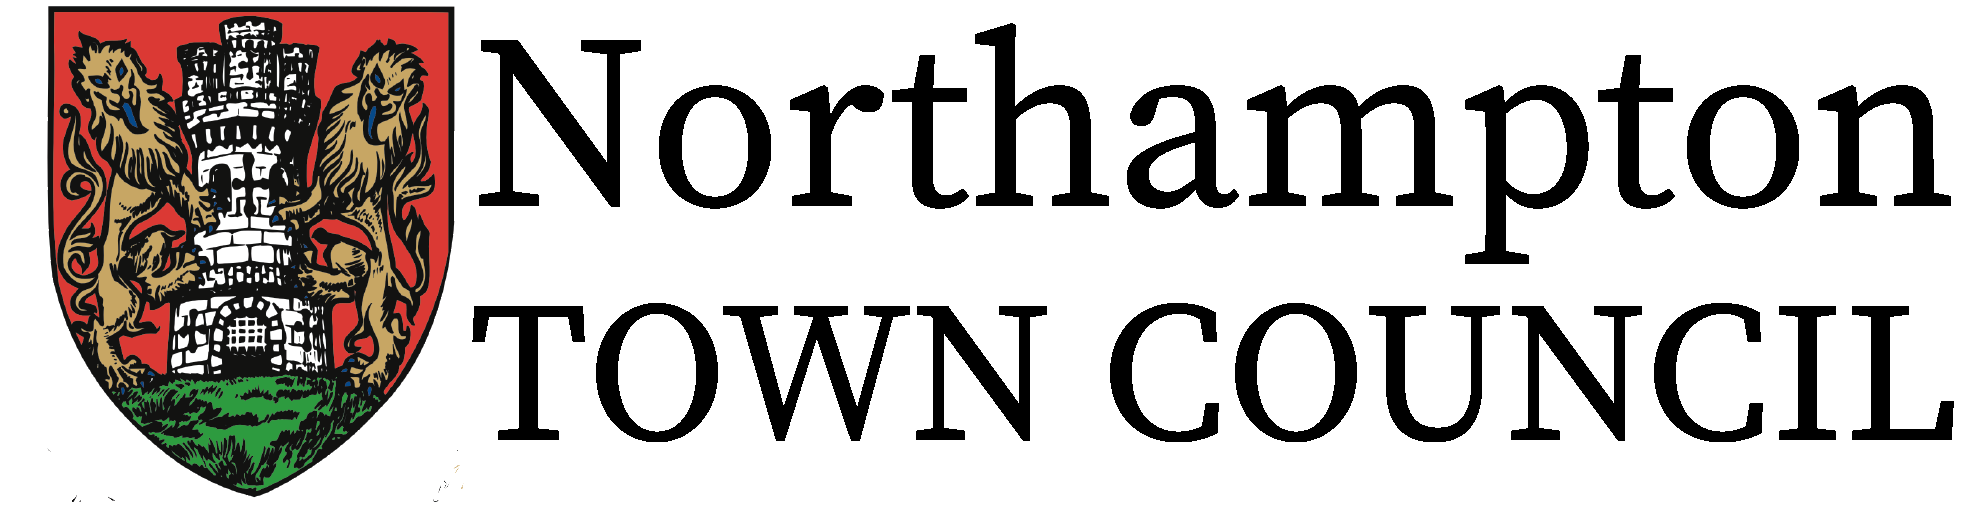 Red top and green shield with Castle and lion image. Northampton Town Council in black letters on the right.